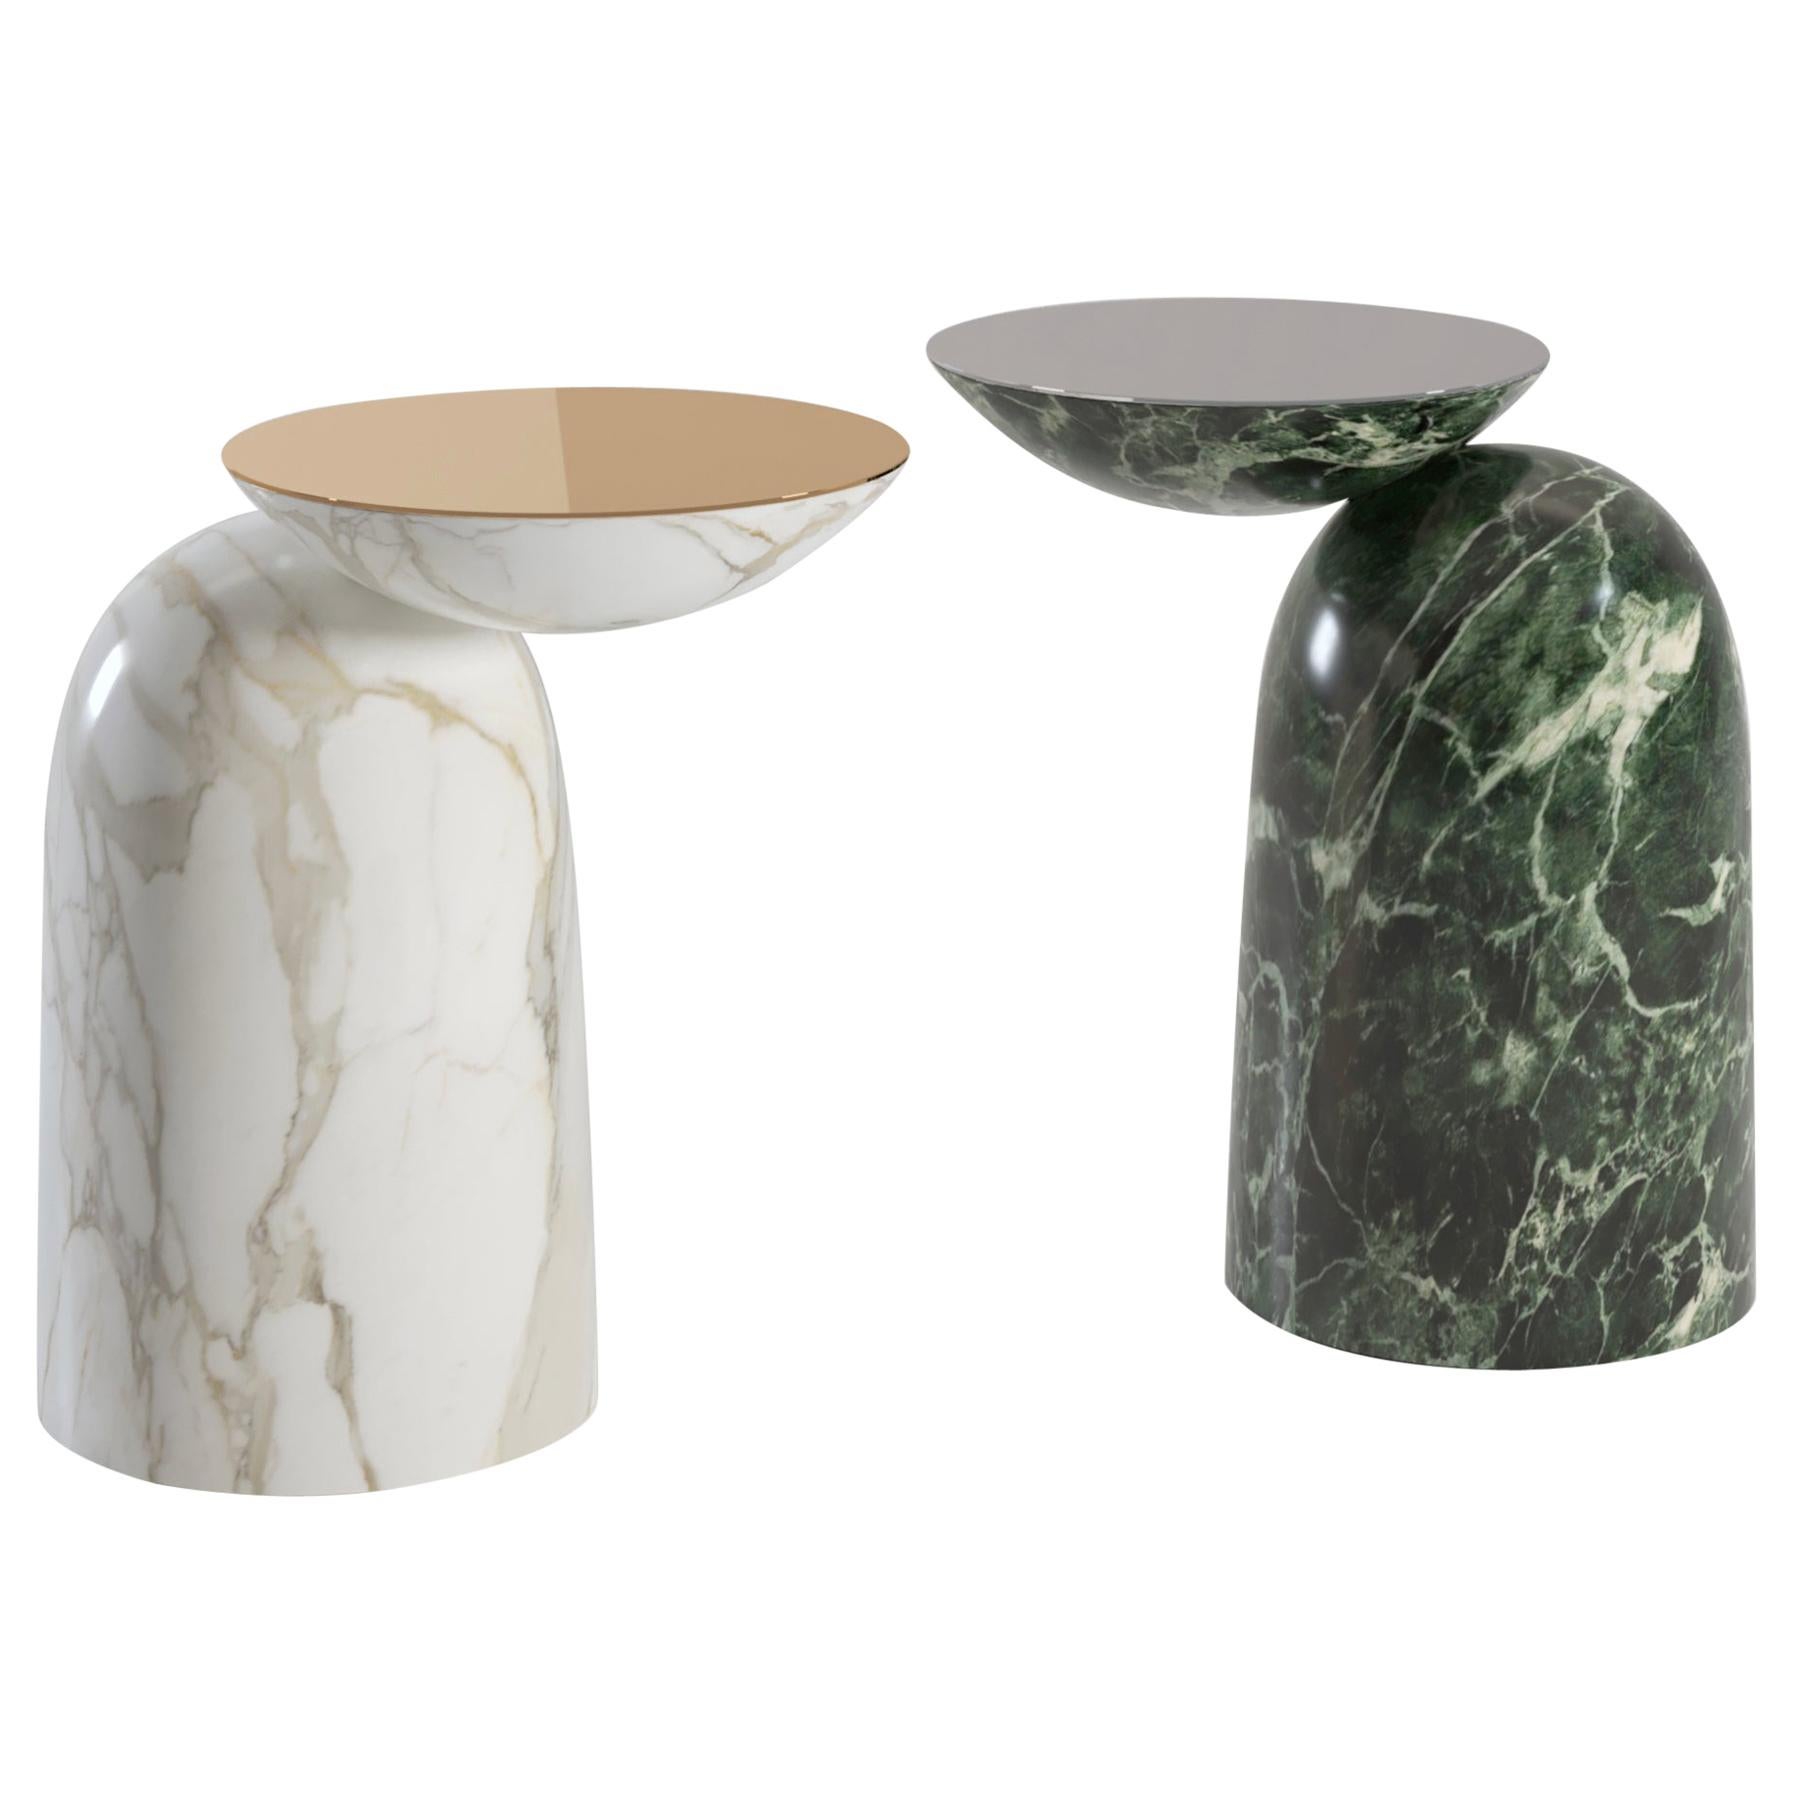 Pingu X Contemporary Side Table in Marble and Metal by Artefatto Design Studio